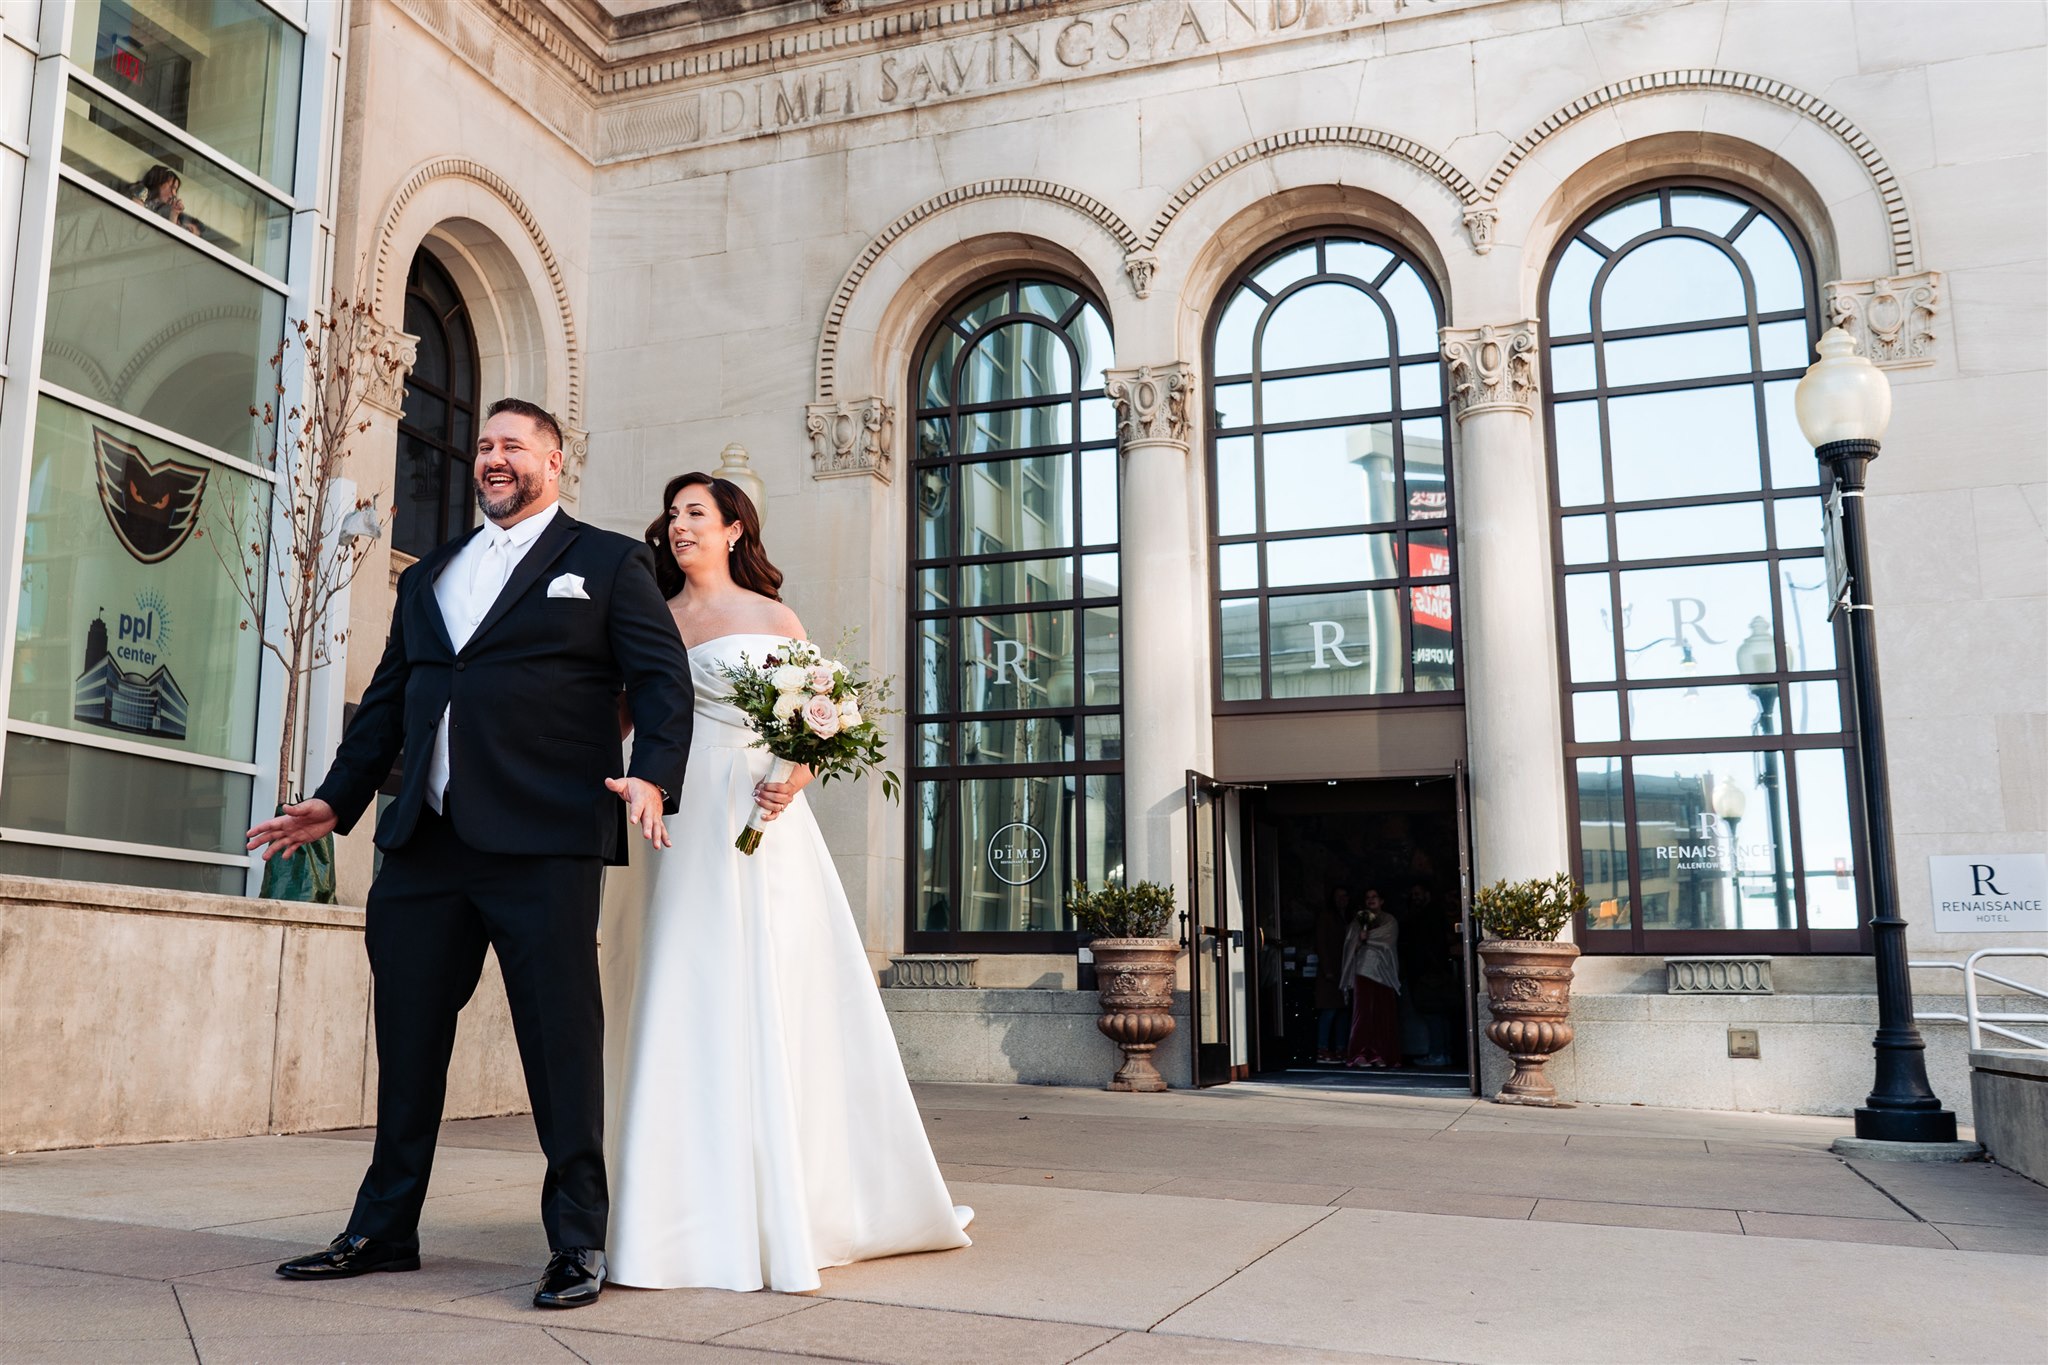 Photo of Bride walking to her groom in front of the Renaissance Allentown Hotel.